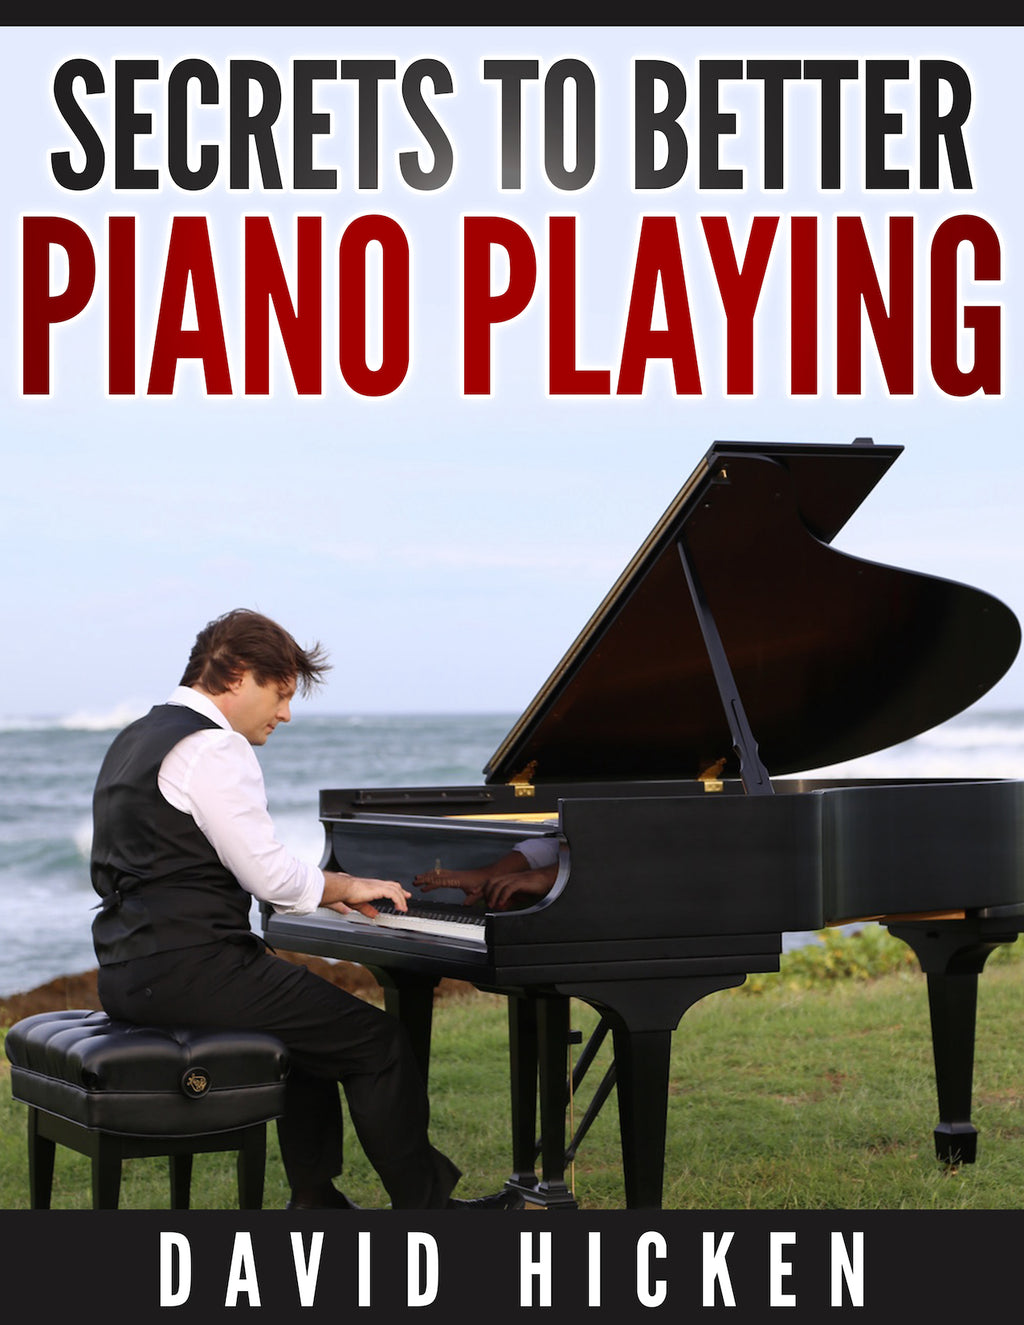 Secrets To Better Piano Playing Book by David Hicken